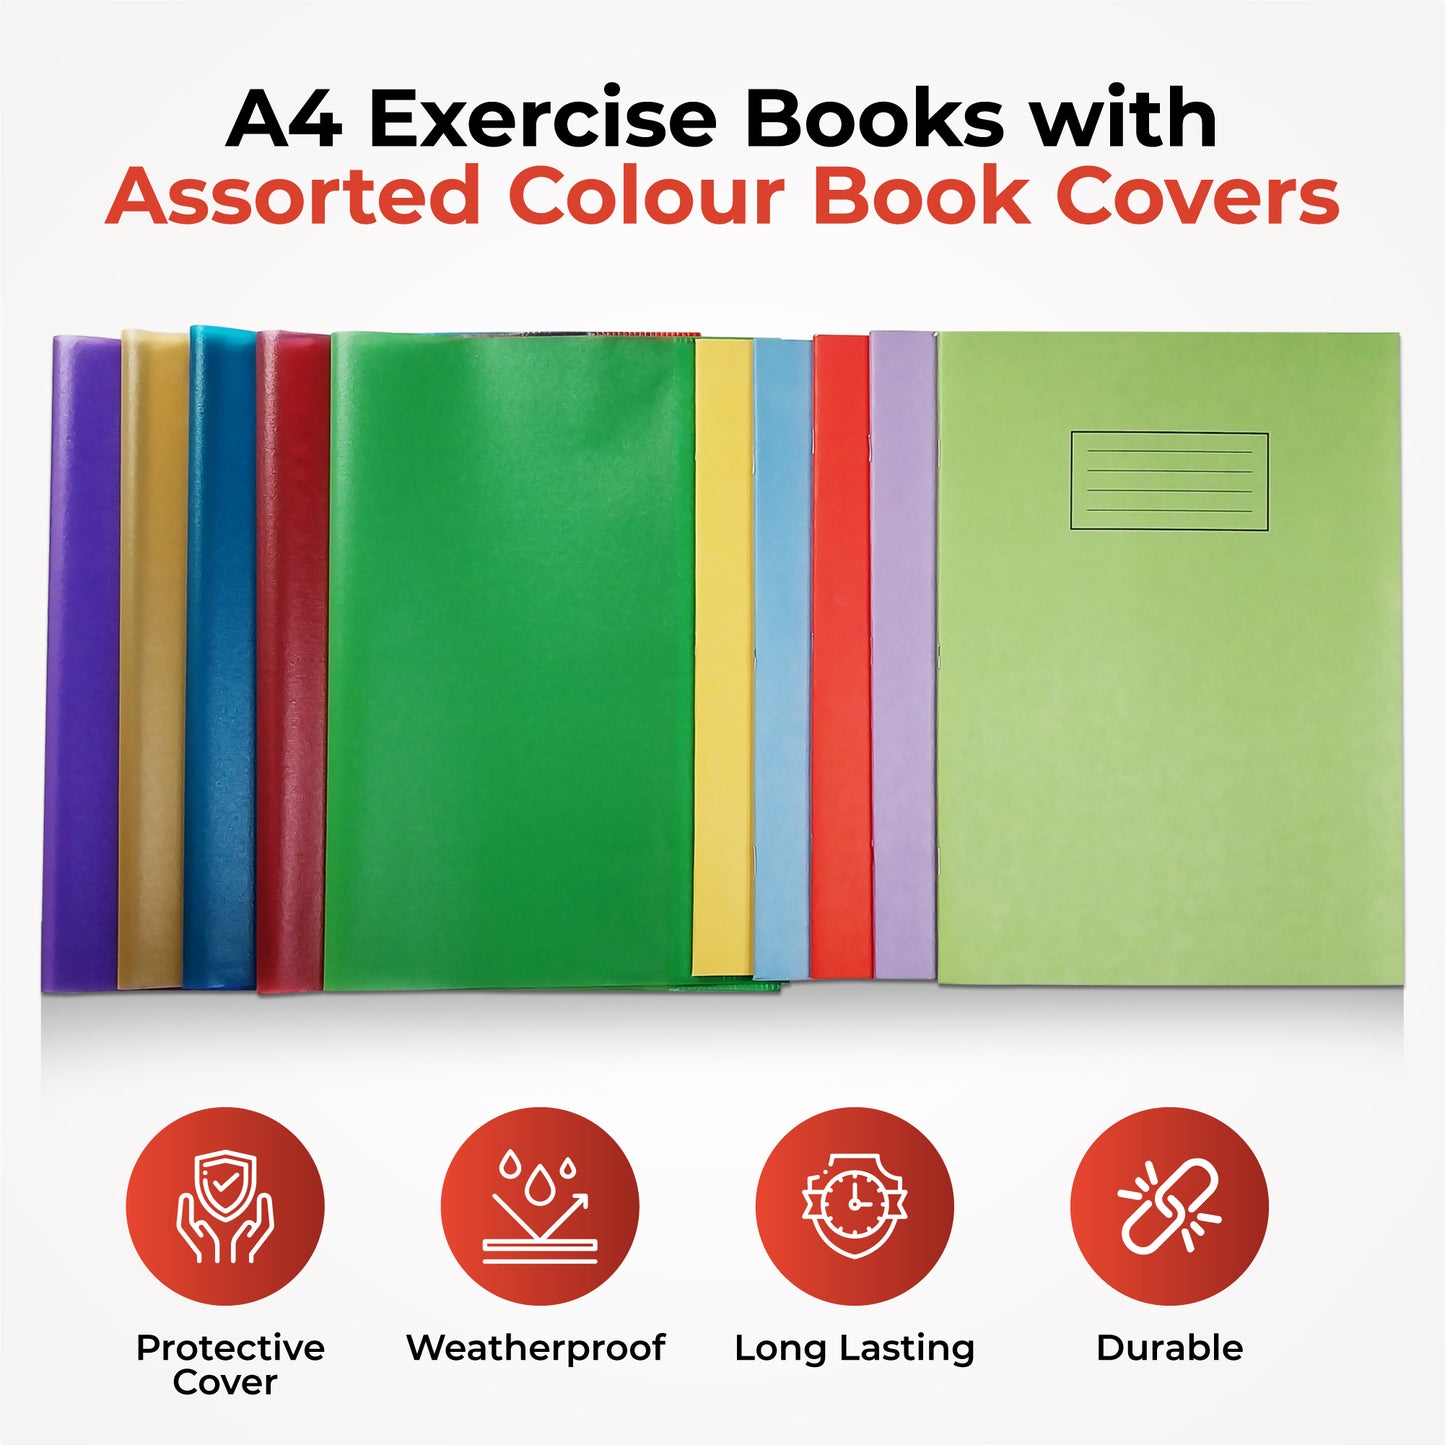 Pack of 10 A4 Assorted Coloured Exercise Books with Coloured Book Covers